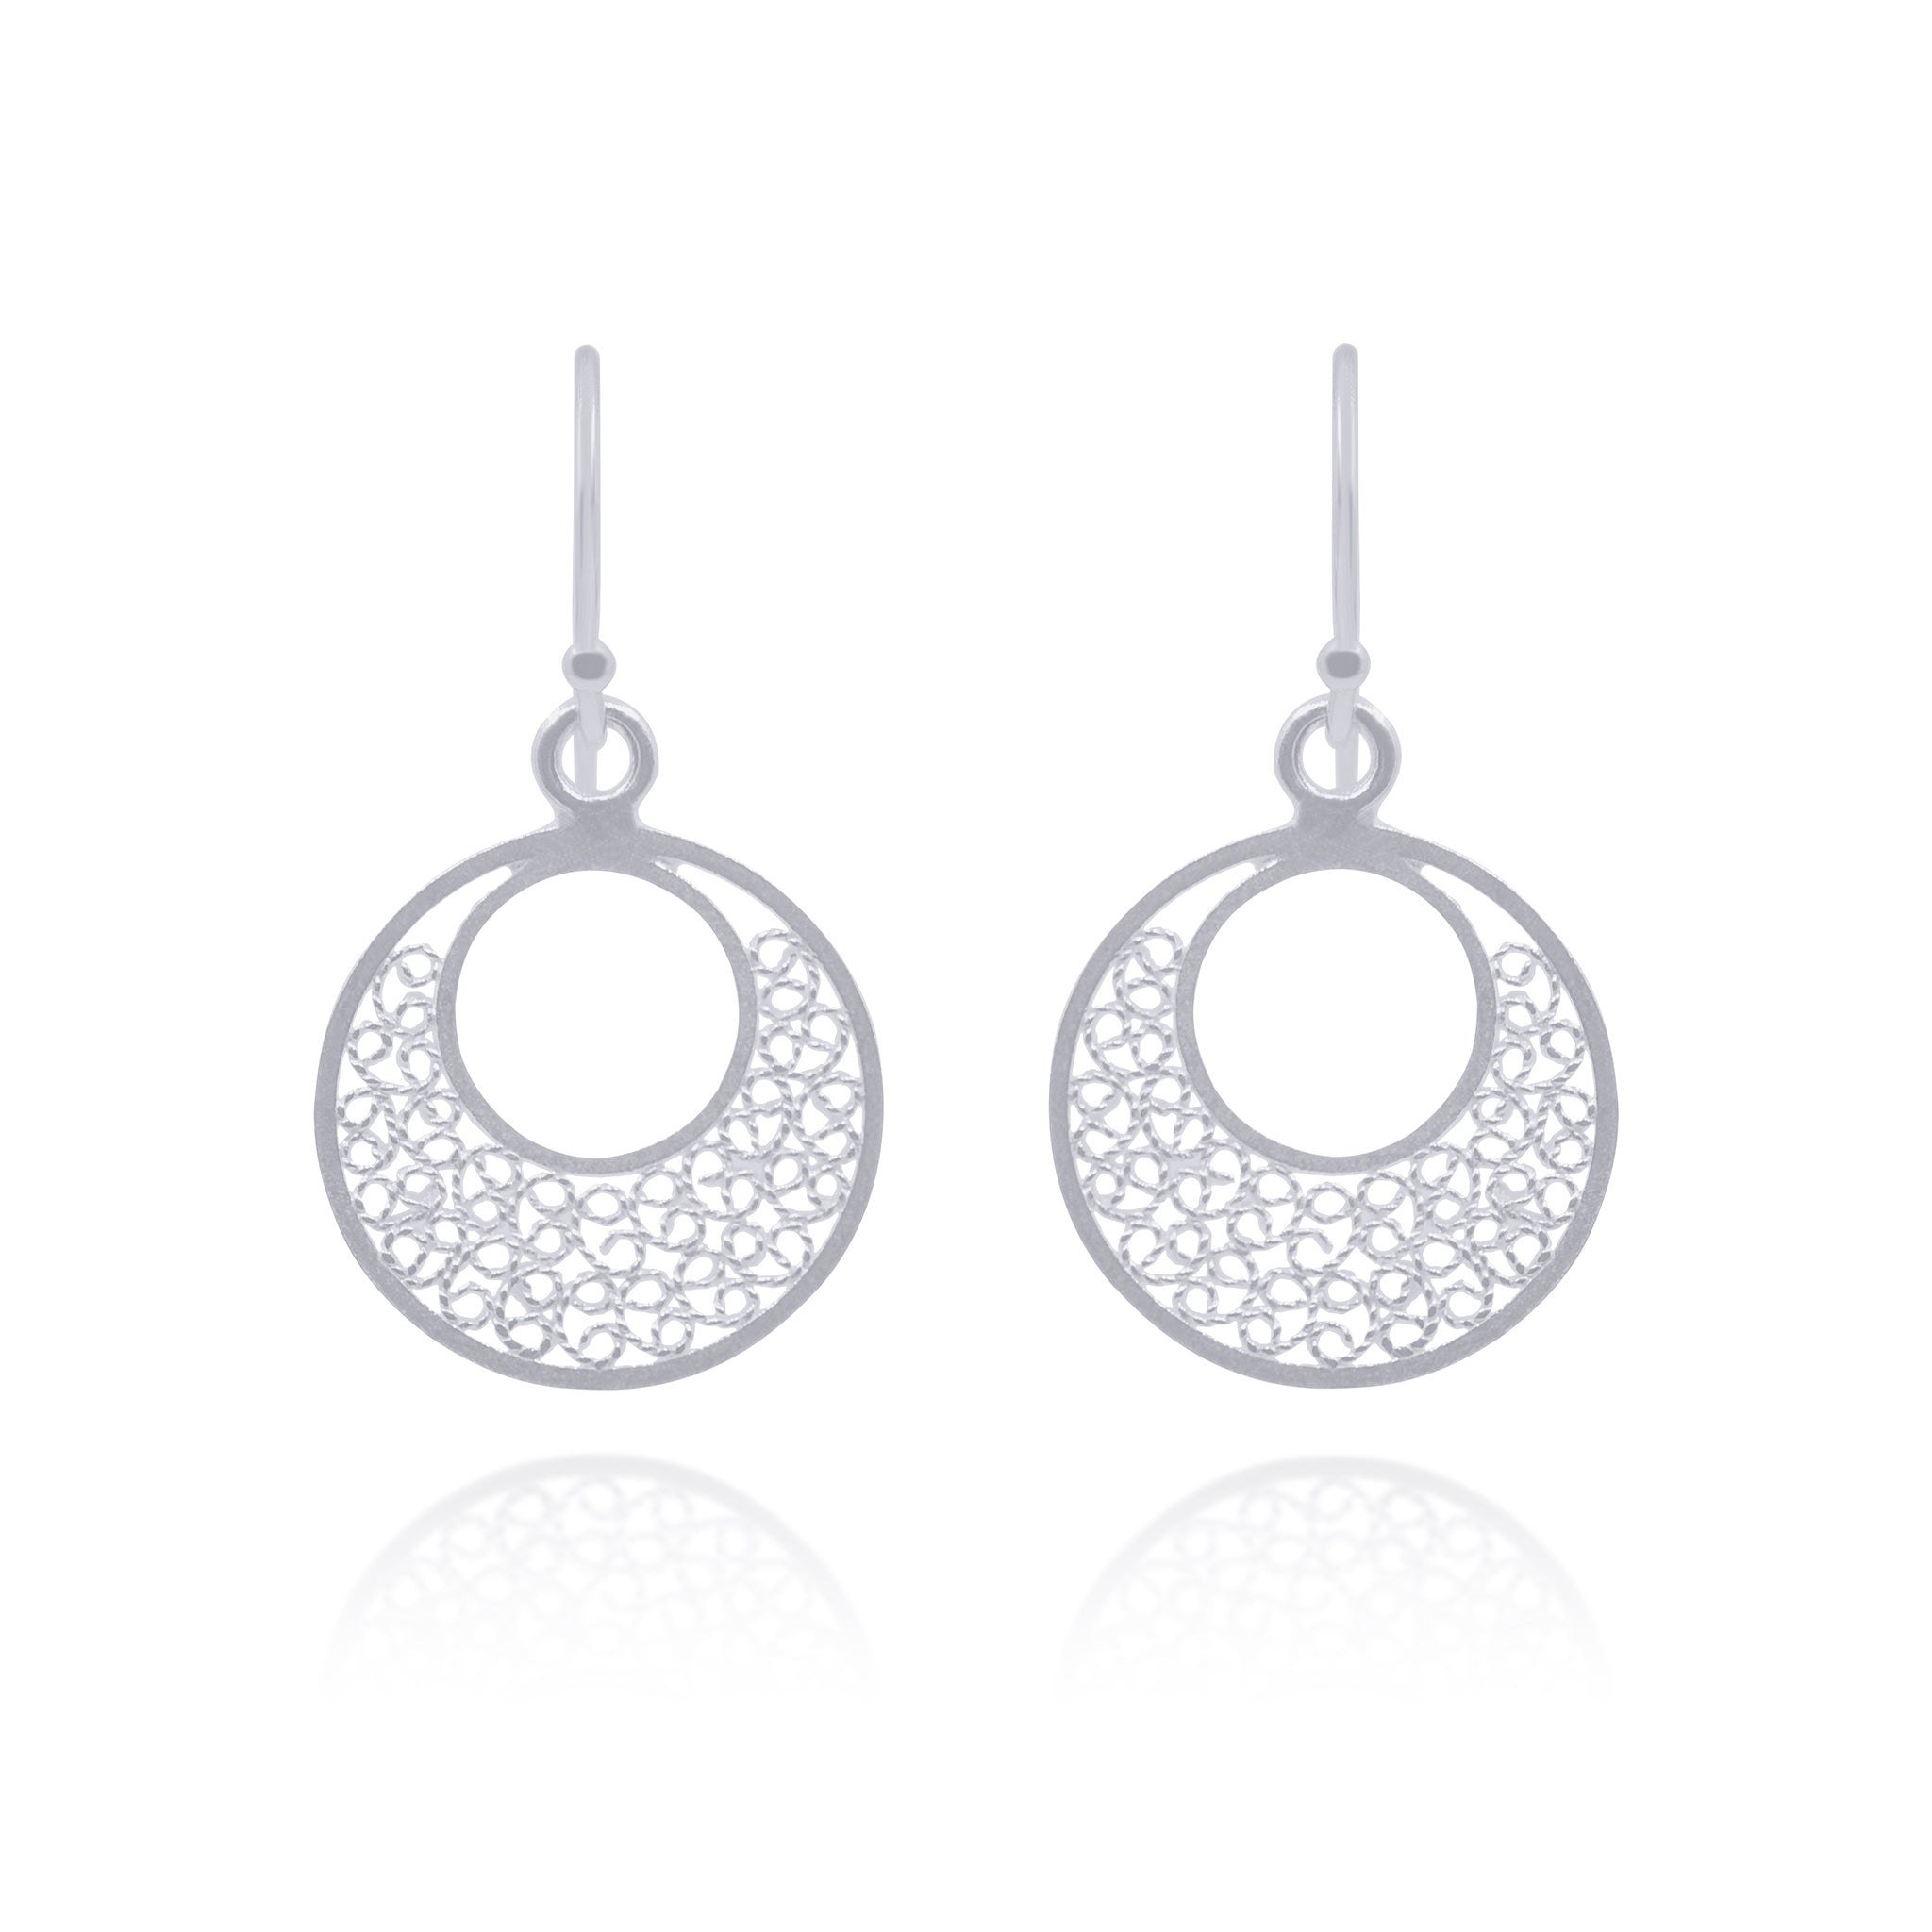 PILE SILVER SMALL EARRING FILIGREE